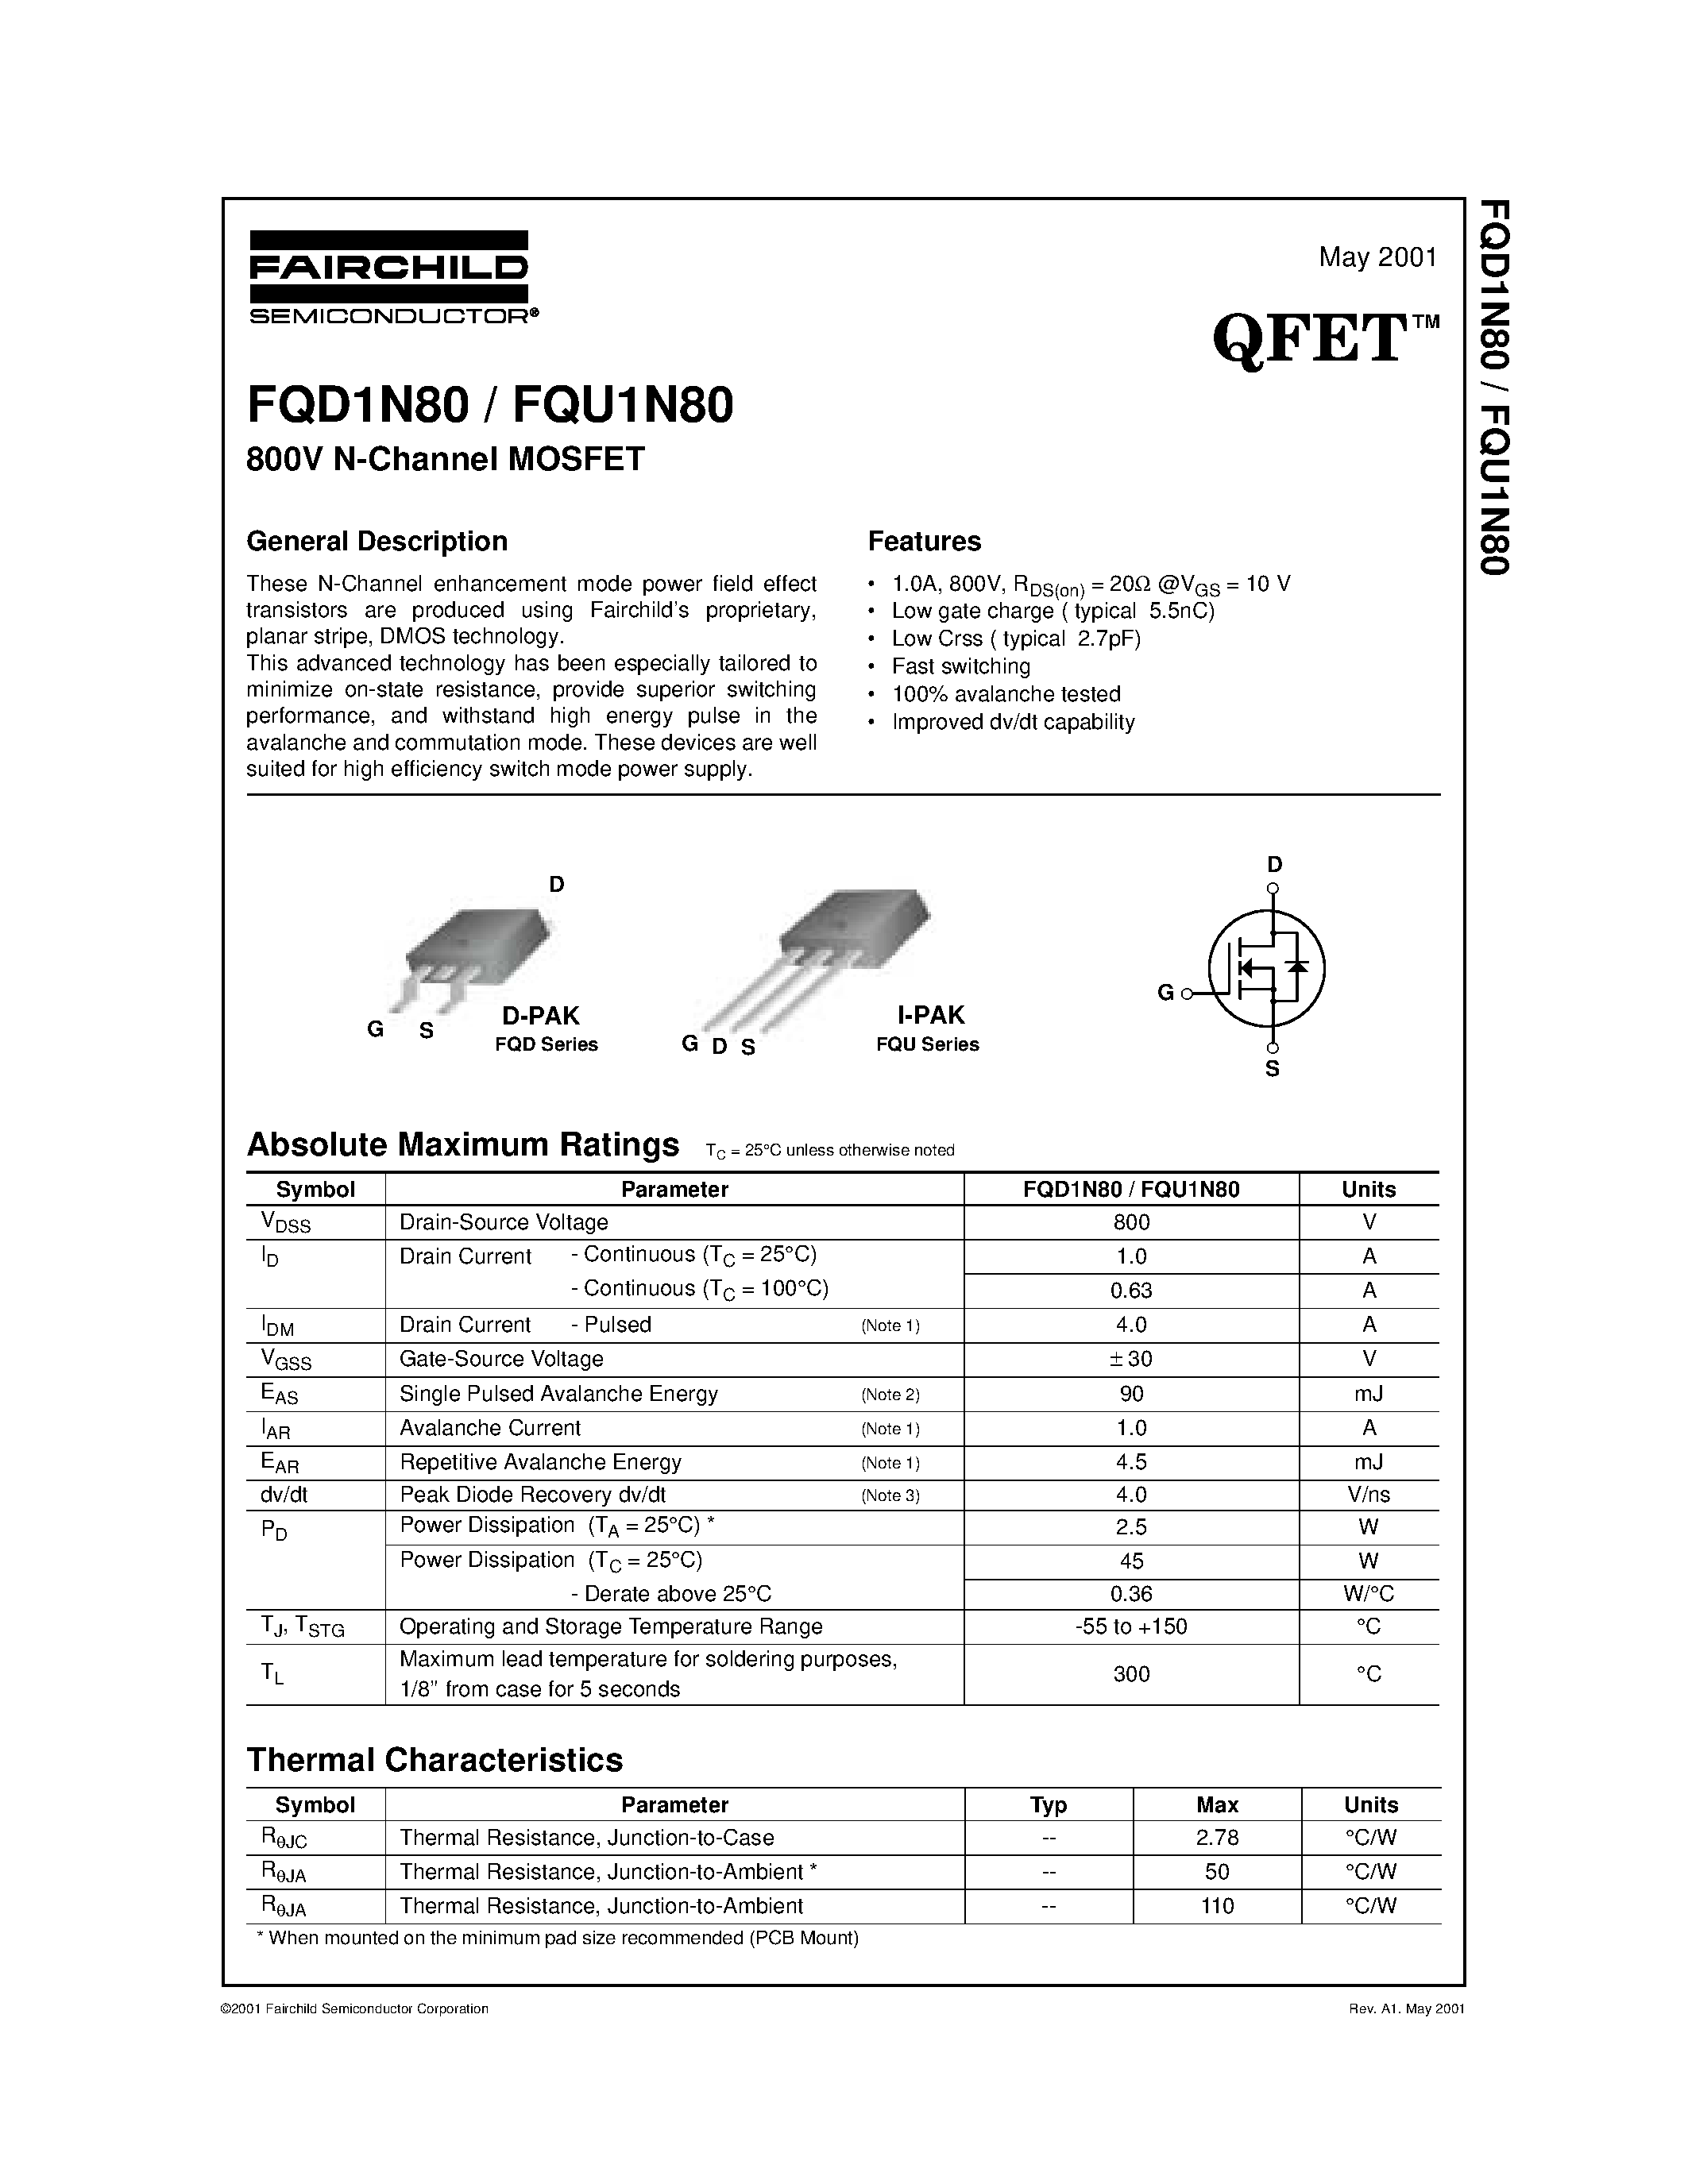 Datasheet FQD1N80 - 800V N-Channel MOSFET page 1